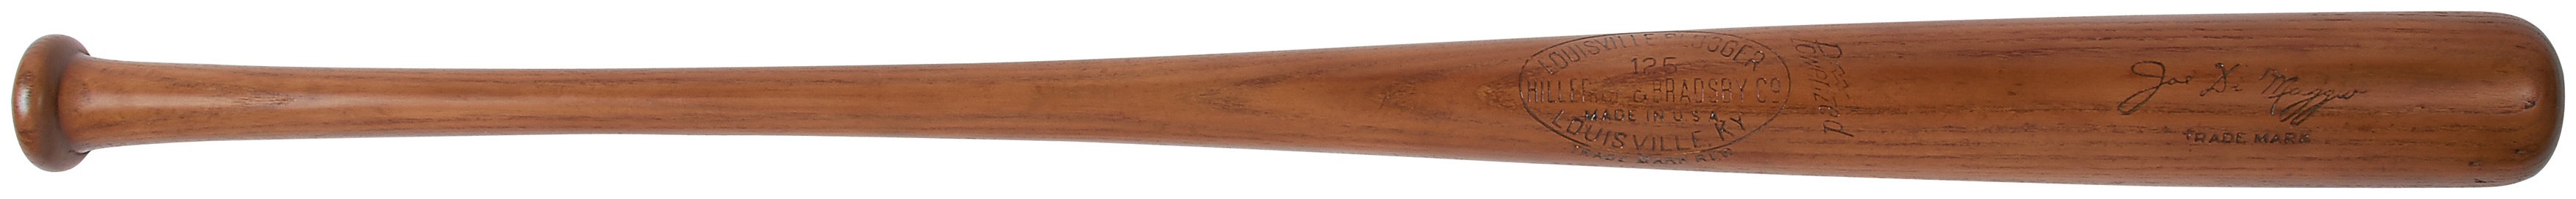 Circa 1947 Joe DiMaggio Game Used Bat with PSA LOA (ex-George "Snuffy" Stirnweiss Collection)